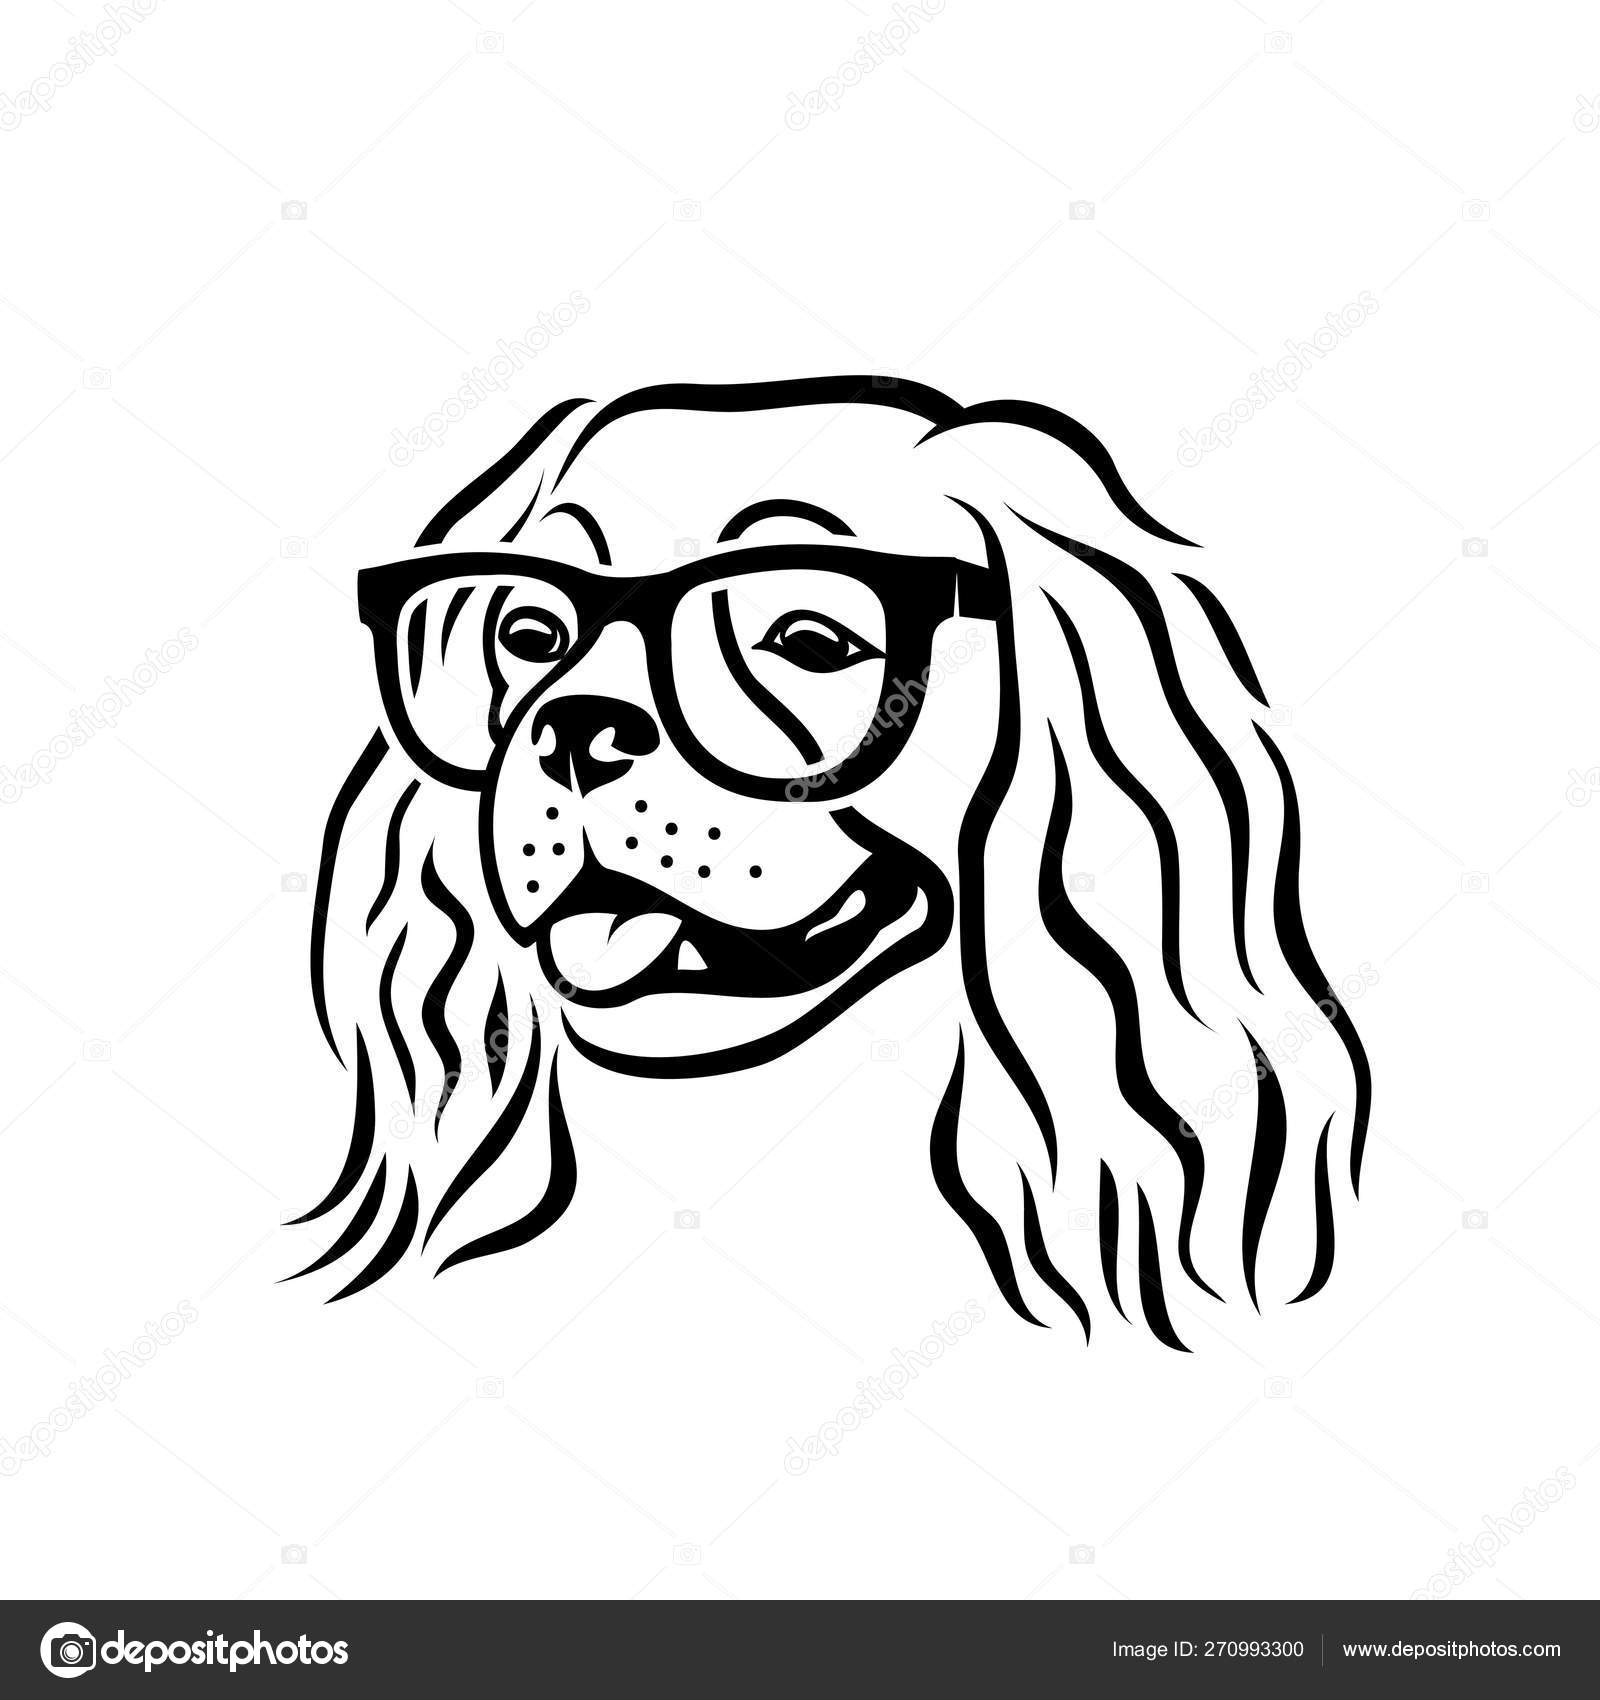 Cavalier King Charles Spaniel Dog Wearing Sunglasses Isolated Vector Illustration Vector by ©I.Petrovic 270993300